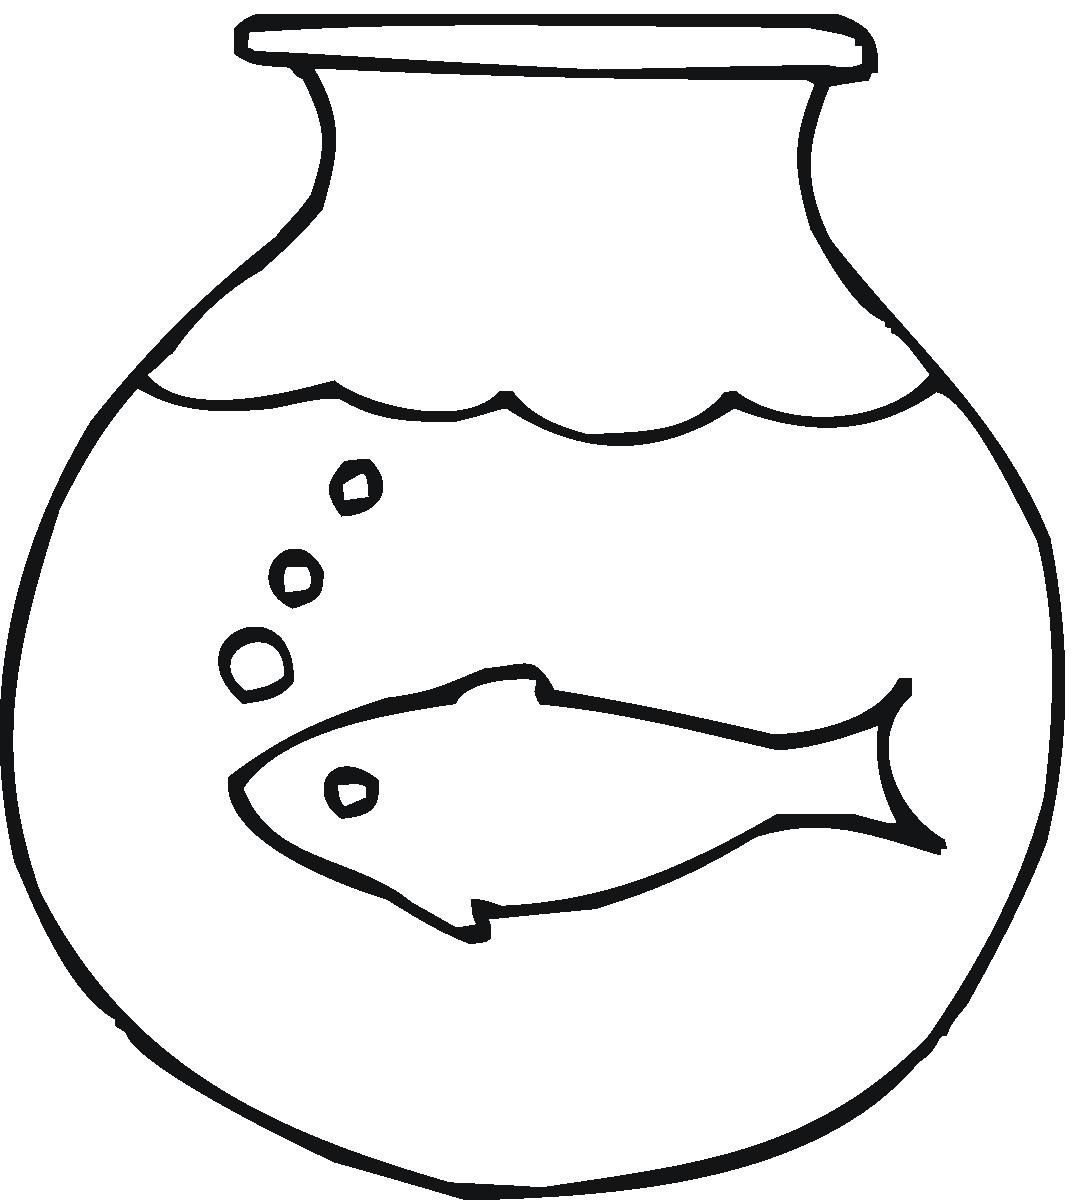 Fish Bowl Clipart Black And White   Clipart Panda   Free Clipart